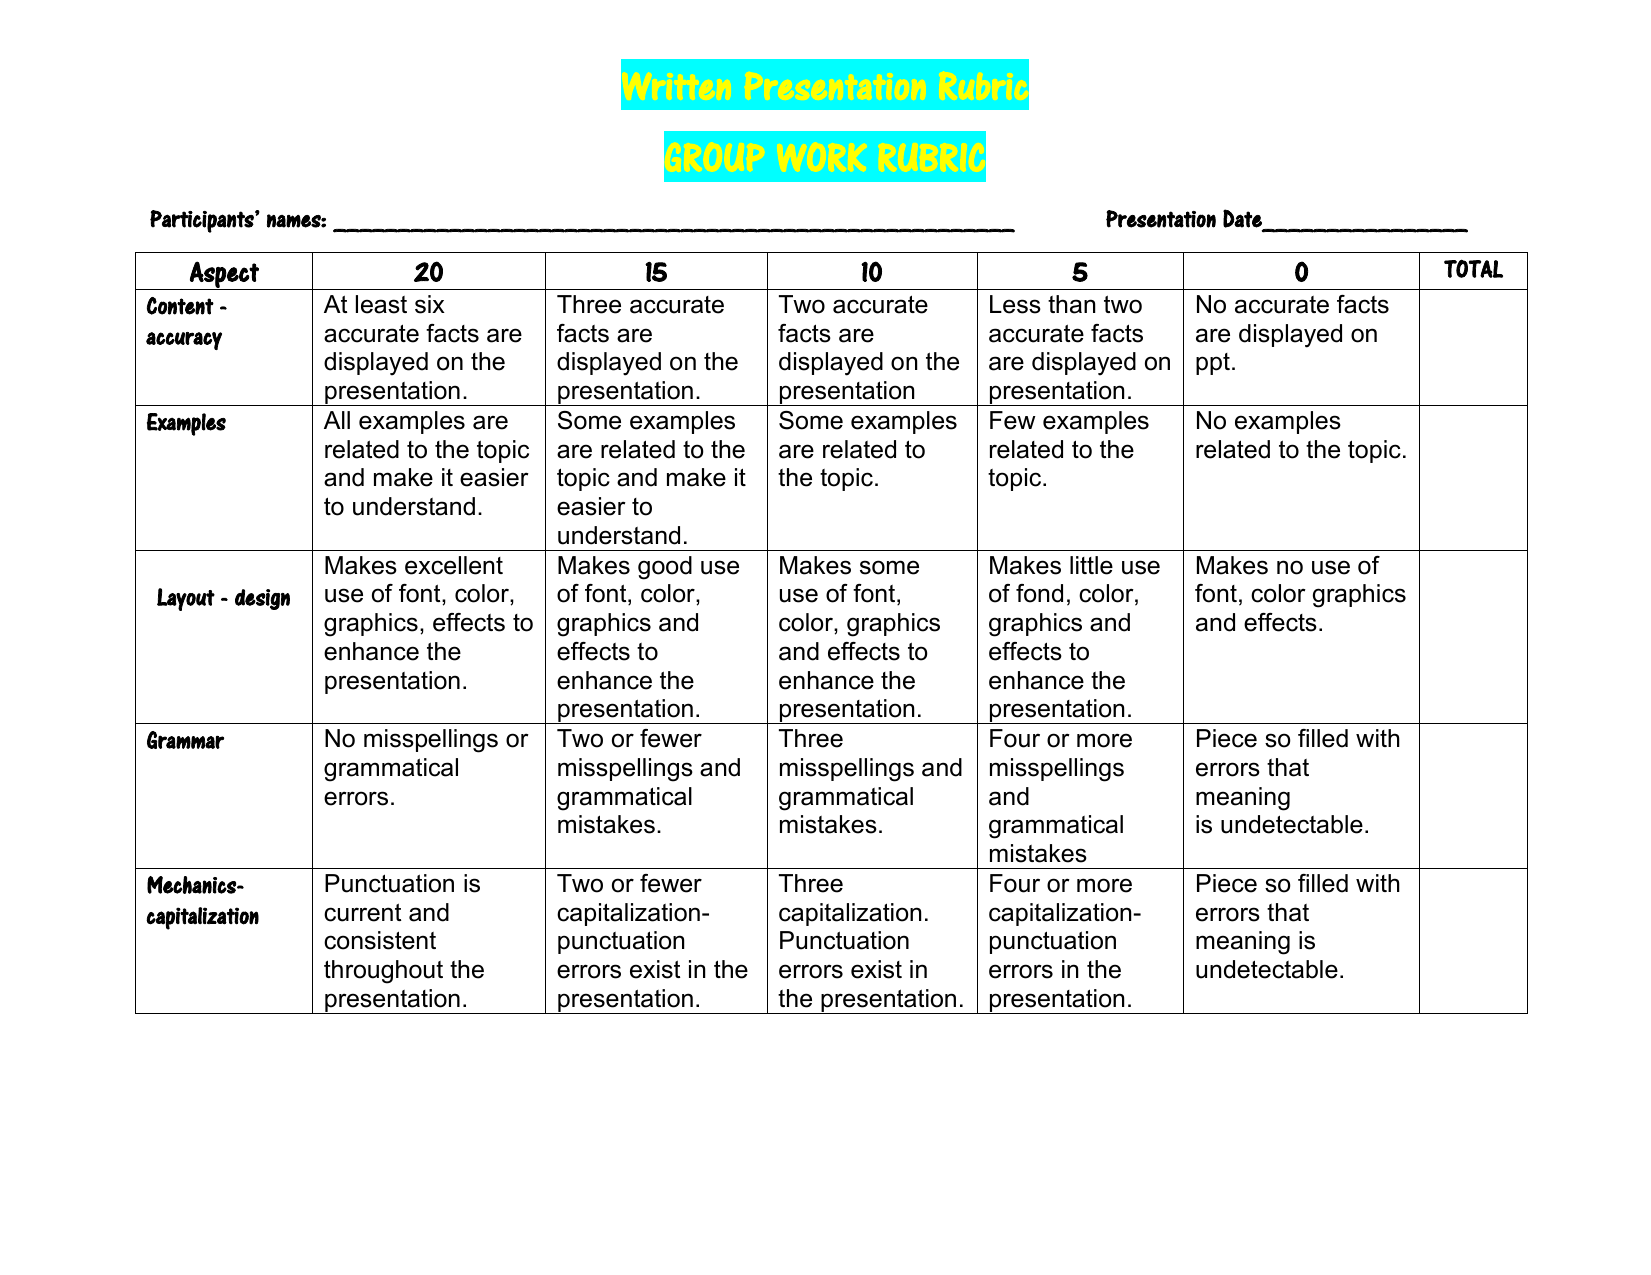 rubrics for group presentation in english